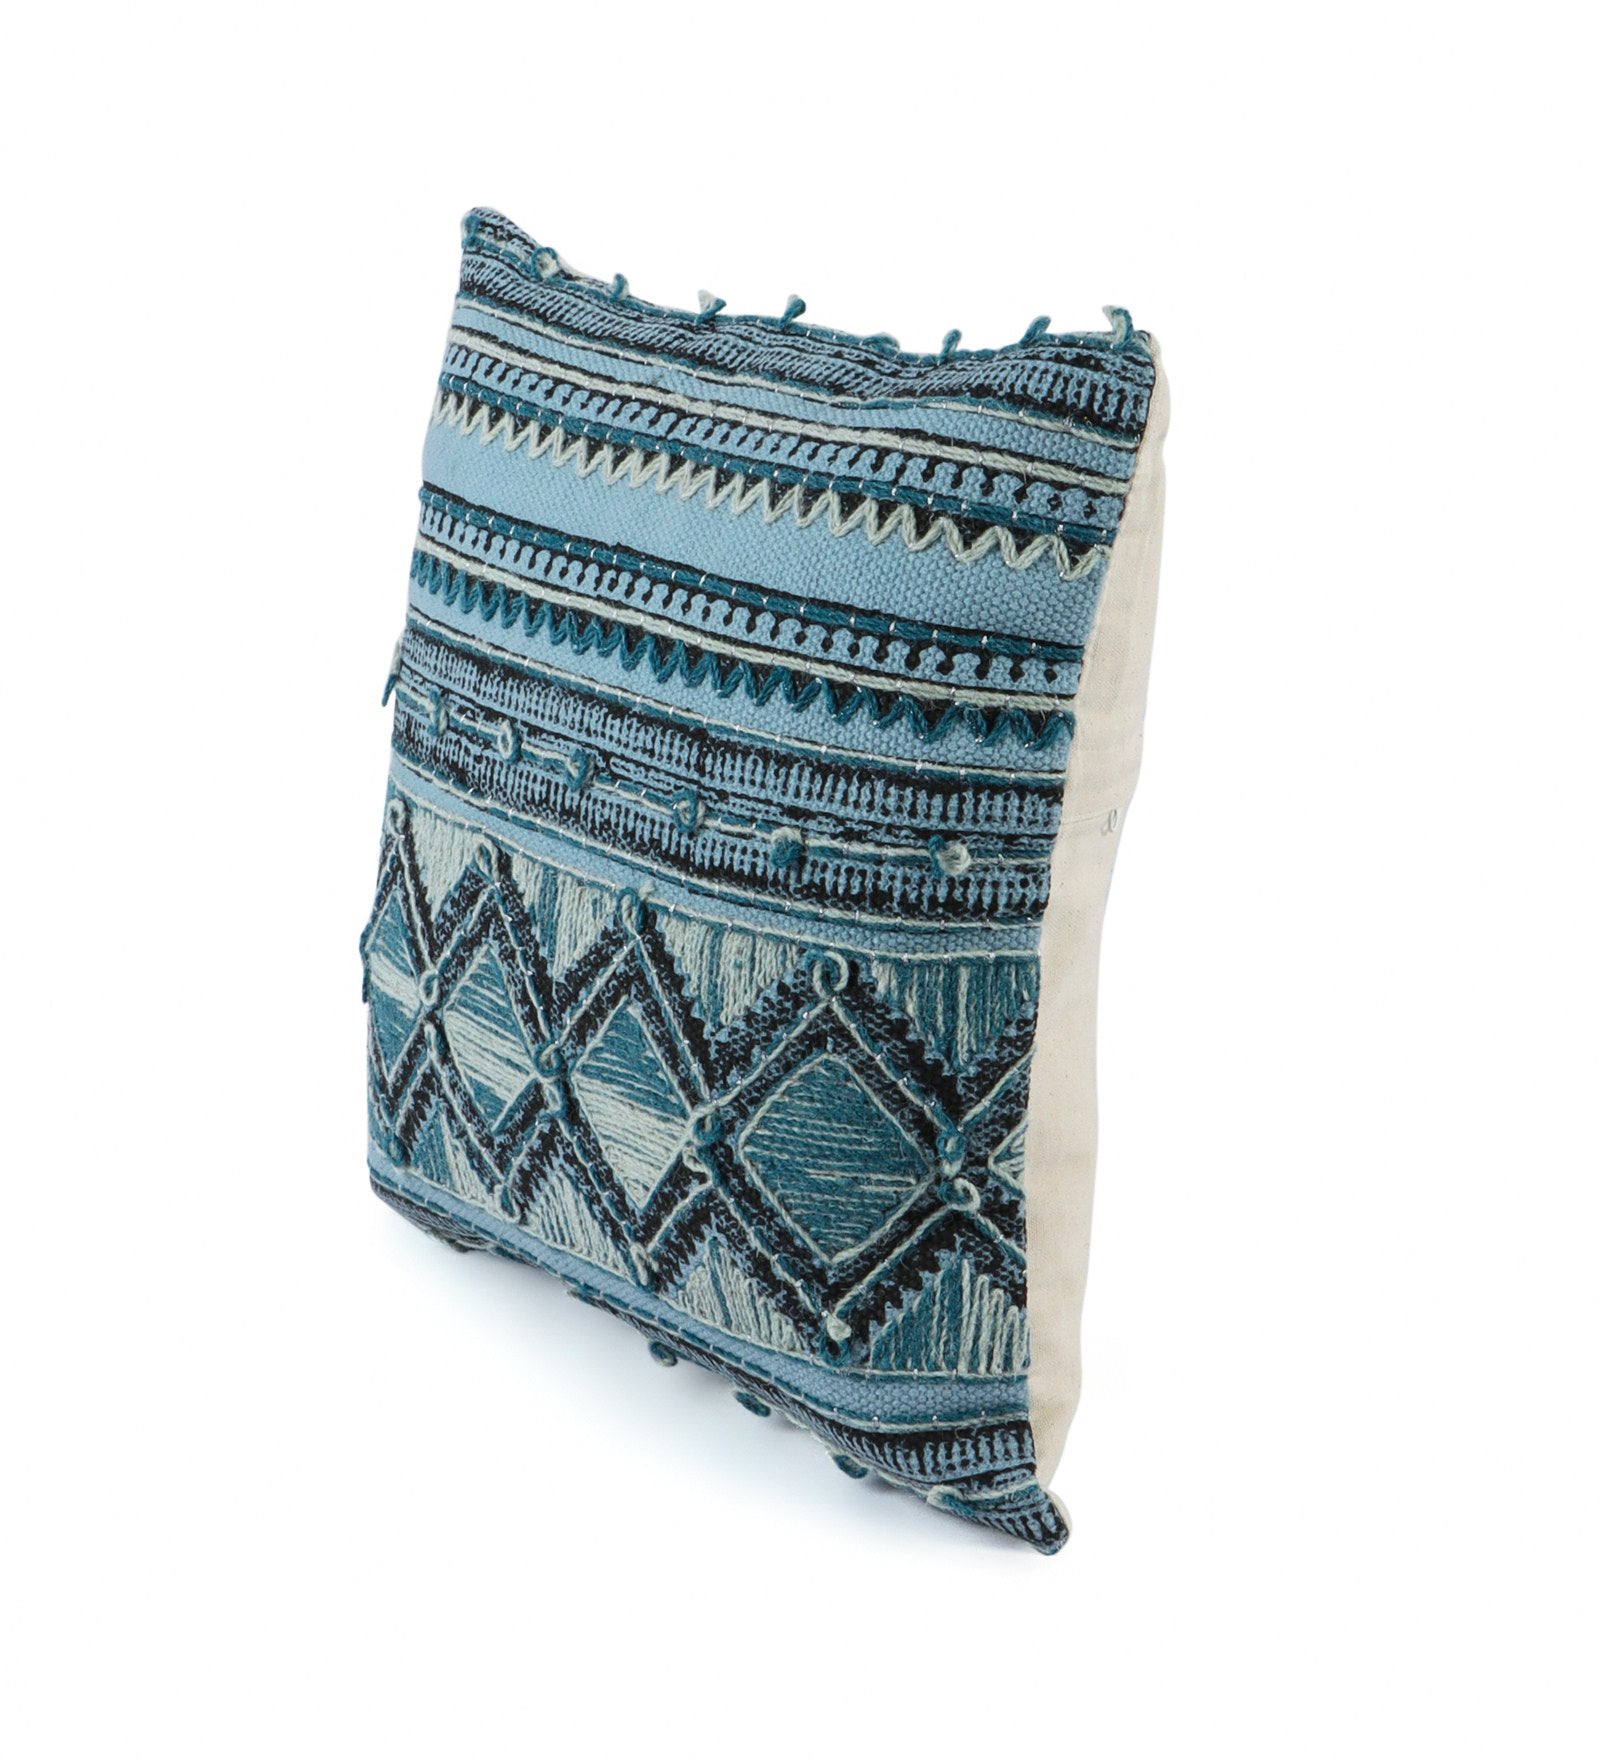 Embroidered Contemporary Cushion Cover (Blue Geometric)